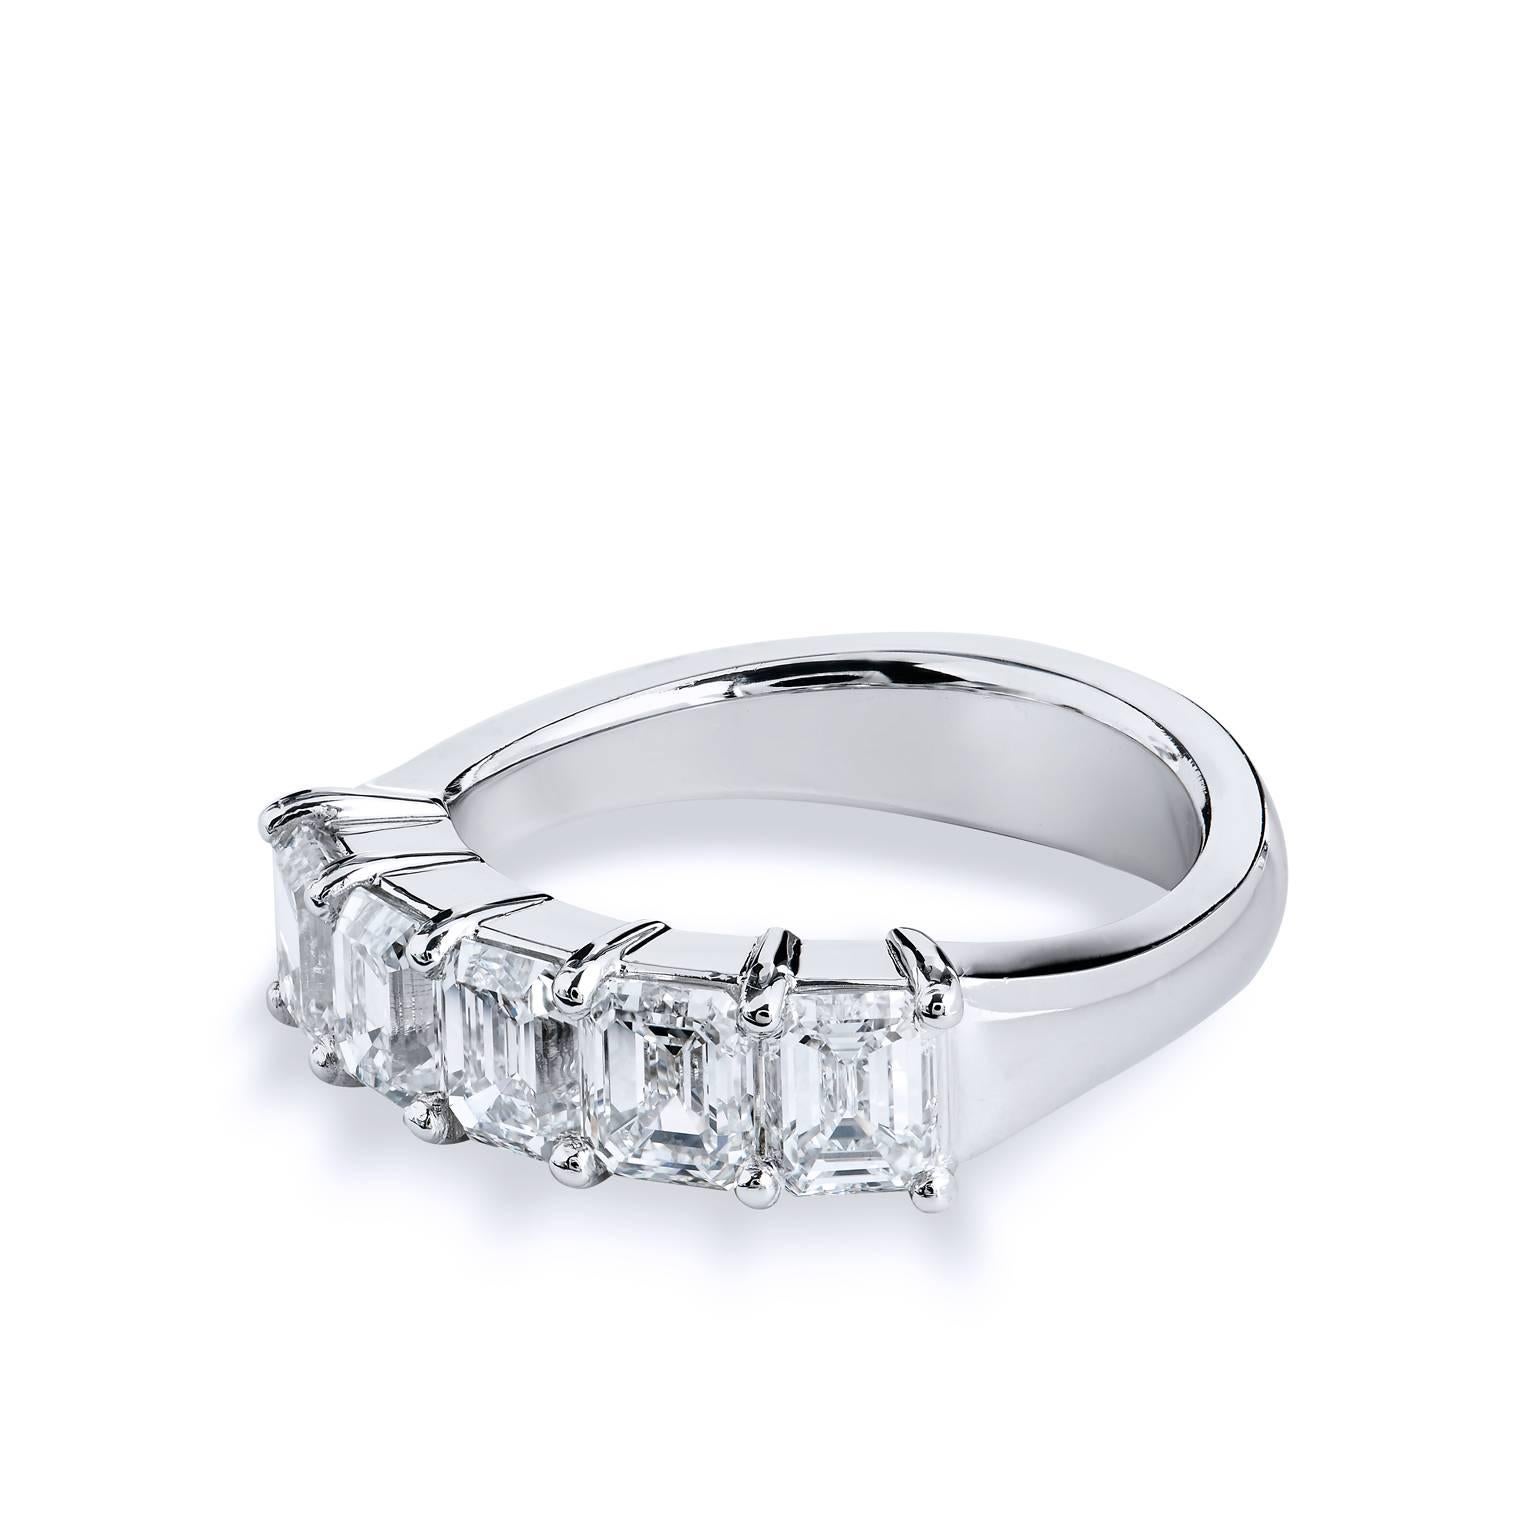 Handmade 2.25 Carats Emerald Cut Diamonds set in a Platinum Band Ring Size 6.25 

This H&H Jewels handmade band ring features 2.52 carat of emerald cut prong set diamonds (D/E/F/WS2). 
They are affixed to a platinum band. 

This ring provides a